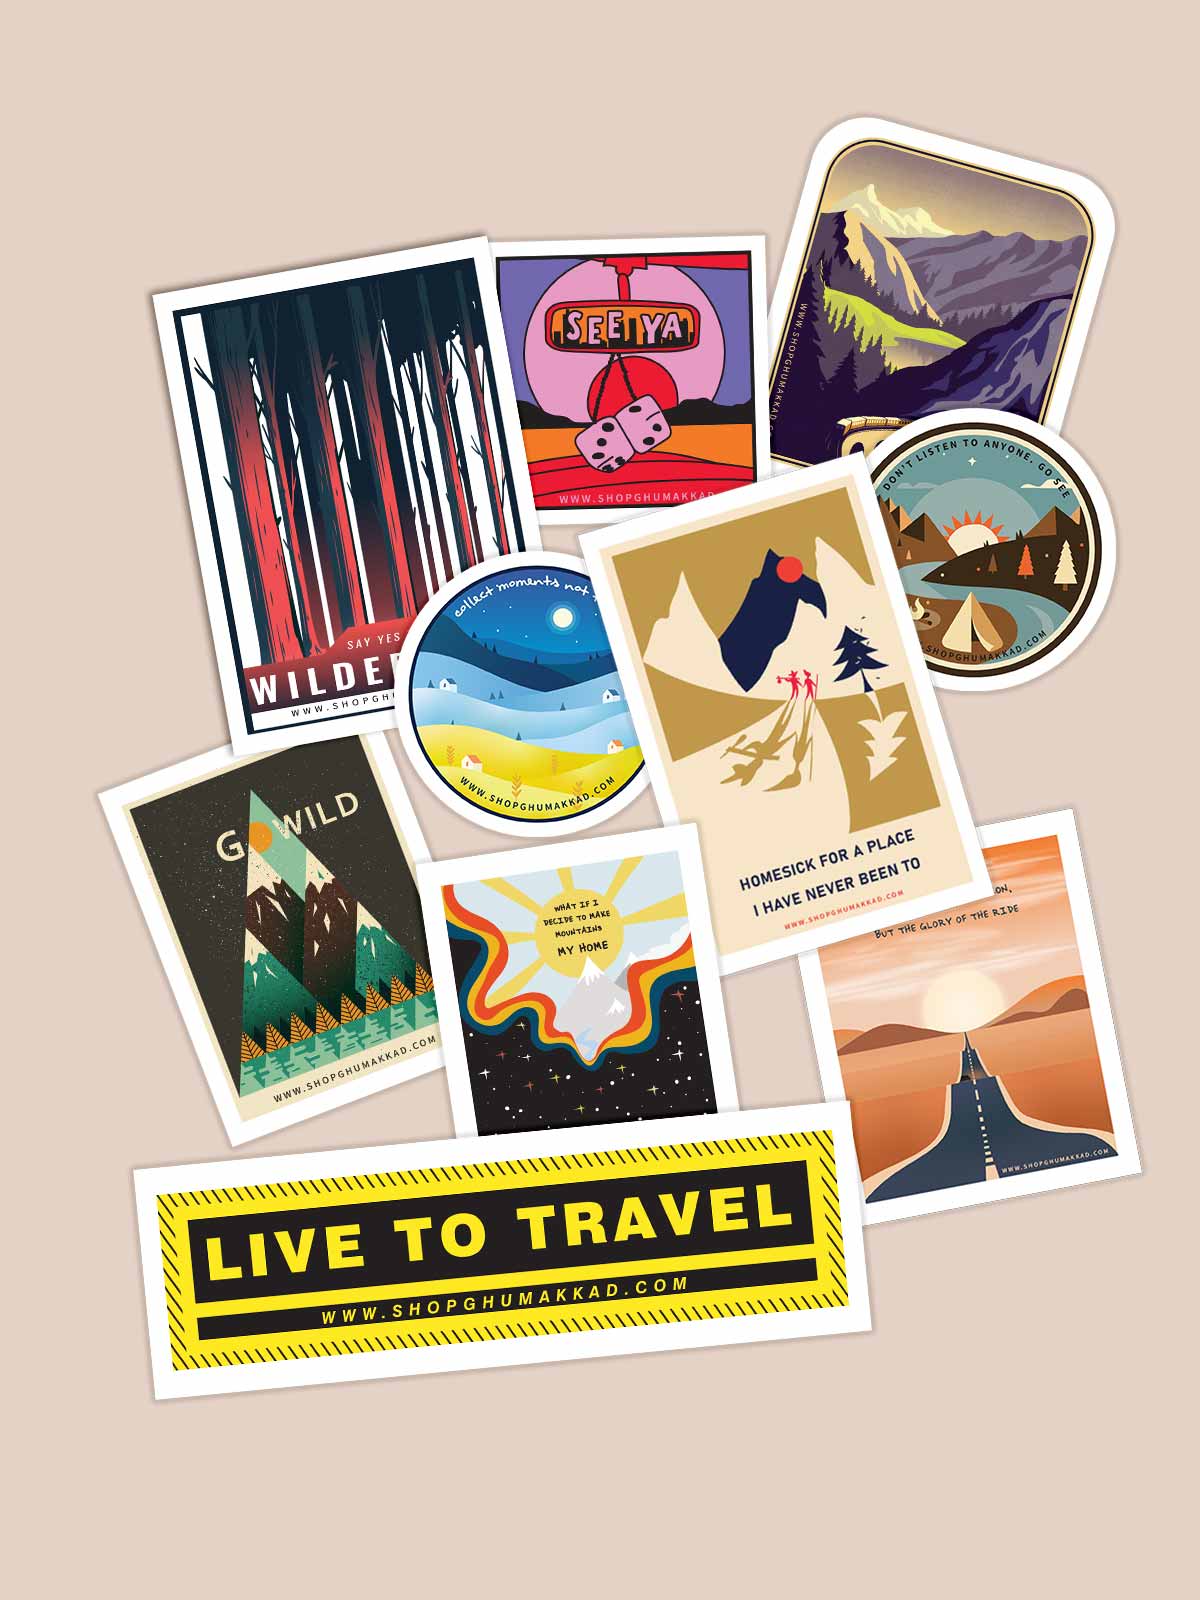 Live To Travel Combo of 10 Travel Stickers by shopghumakkad | Laptop Stickers | Bumper Stickers | Car Stickers | Bike Stickers